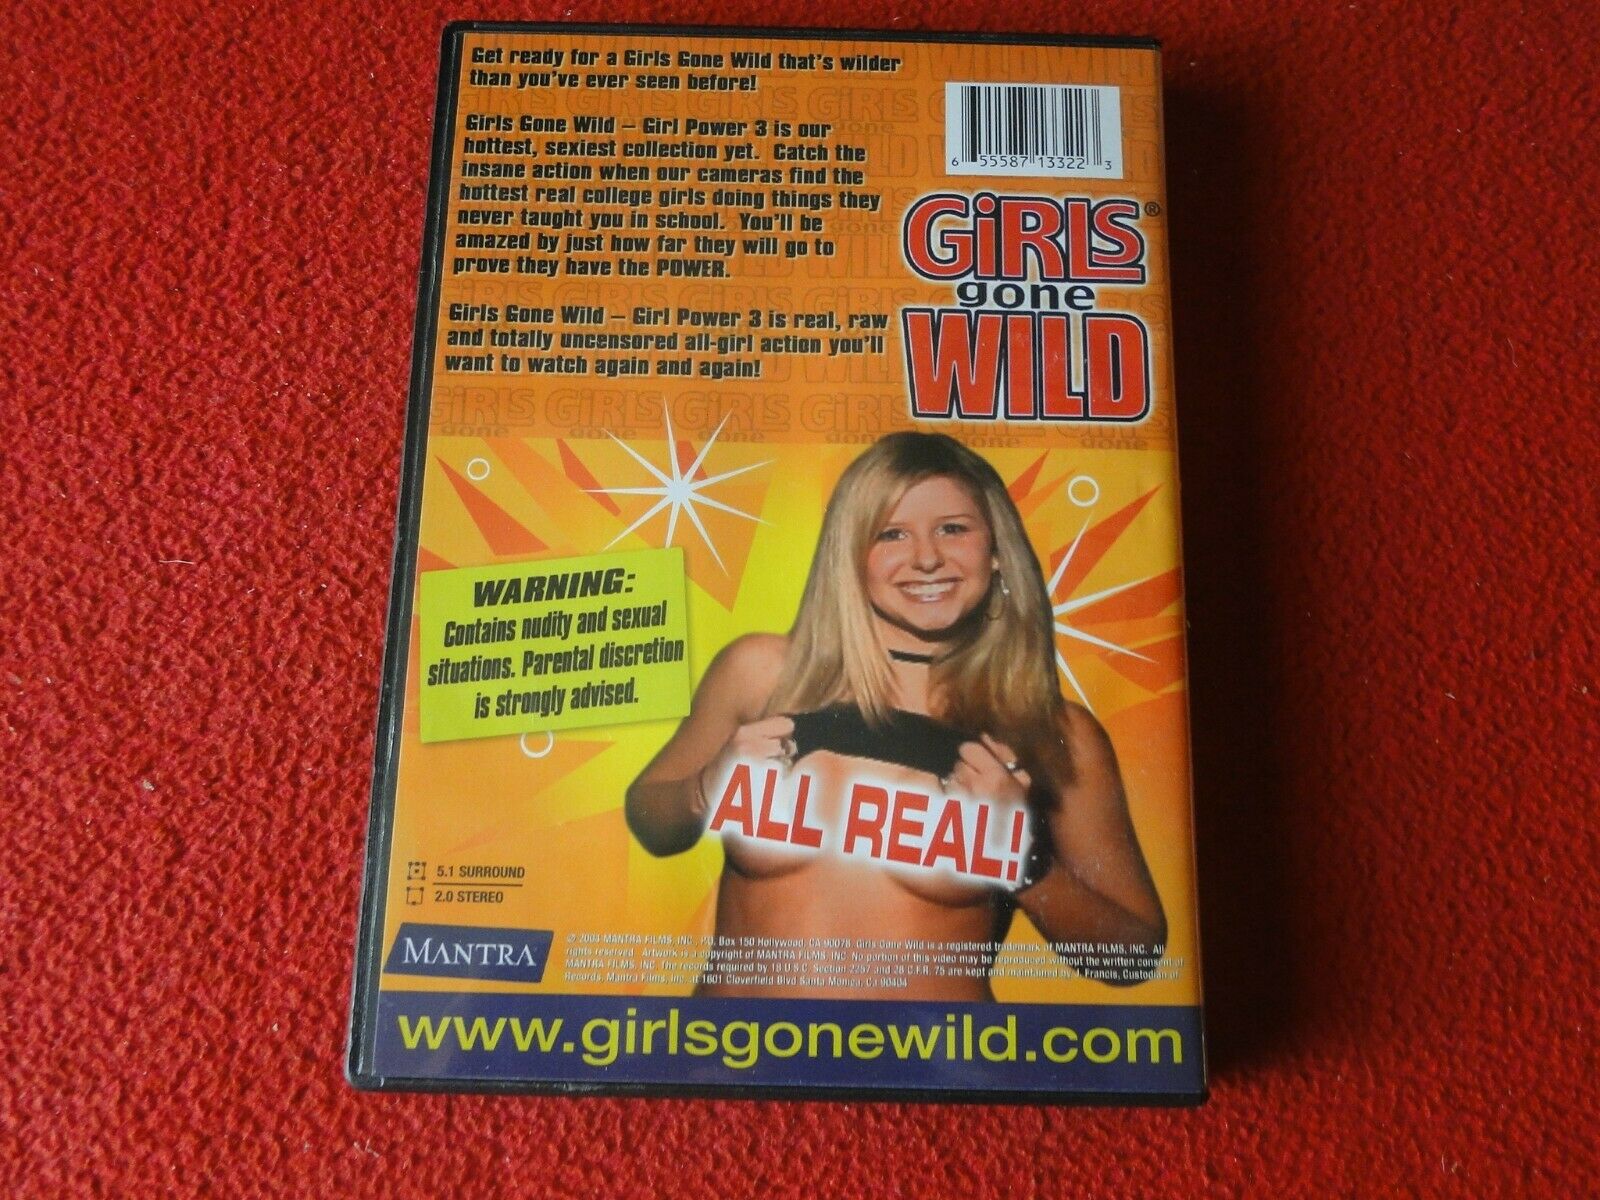 brian hayde recommends Girls Gone Wild Adult